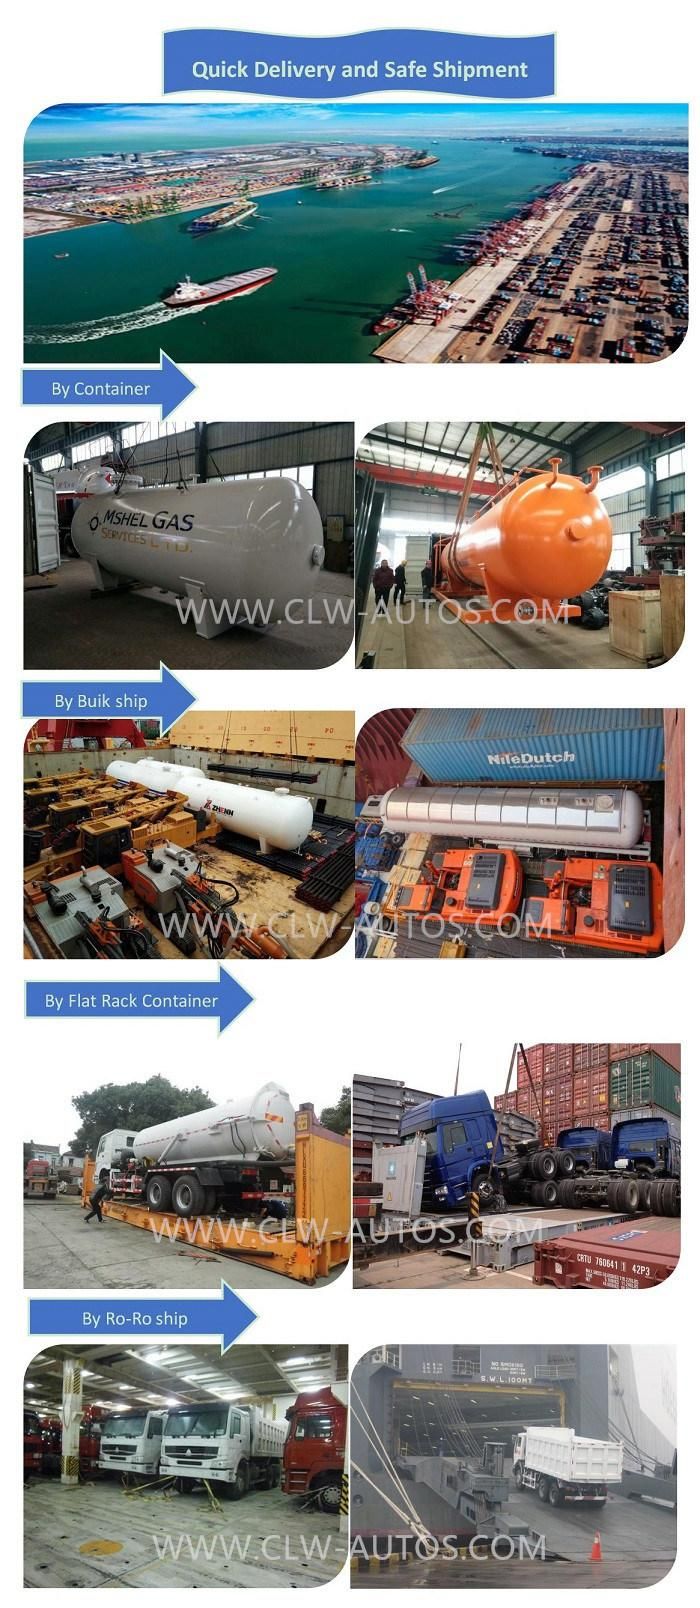 China Factory Price 4*2 Waste Garbage Truck 10, 000 Liters-12, 000 Liters Food Collection Refuse Truck